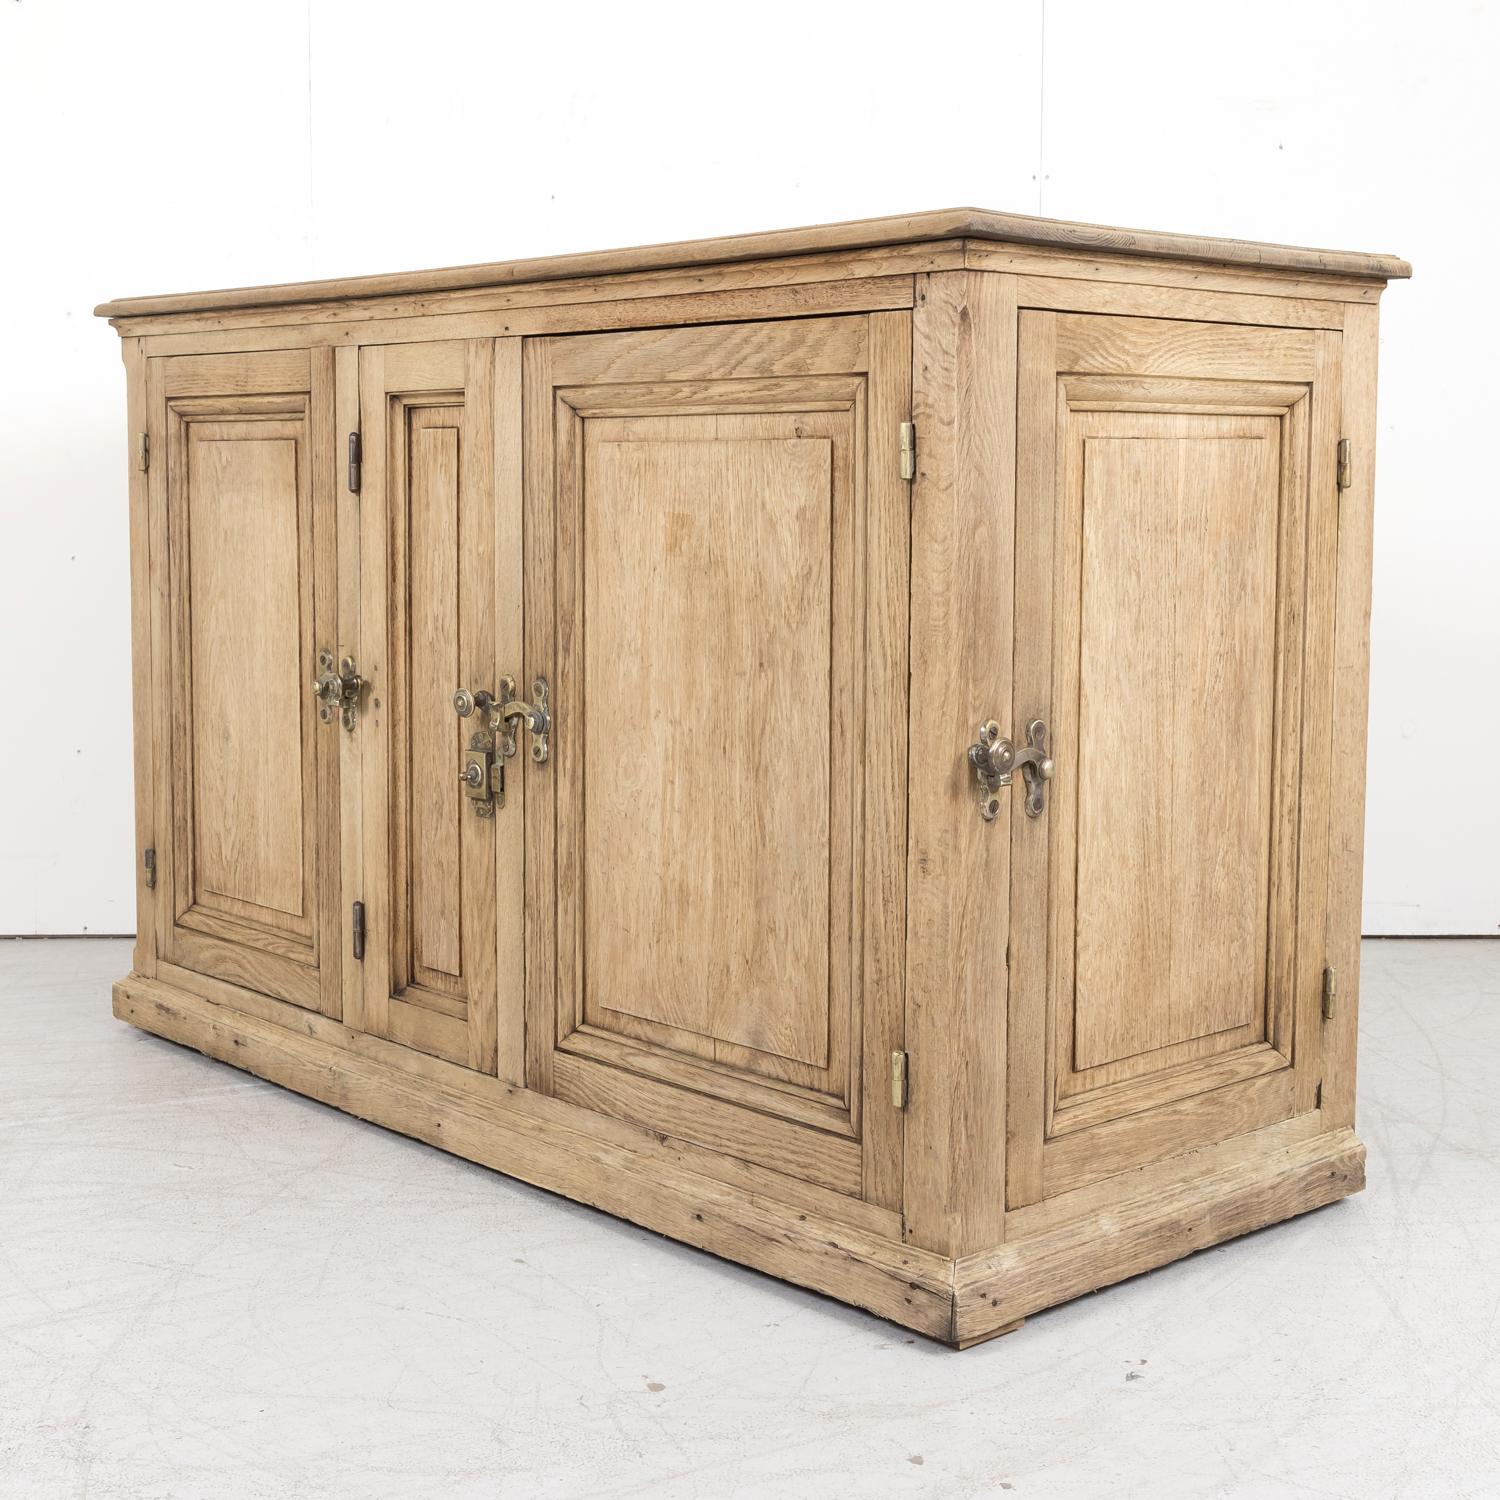 Early 20th Century Large Antique French Bleached Oak Icebox Cabinet or Island